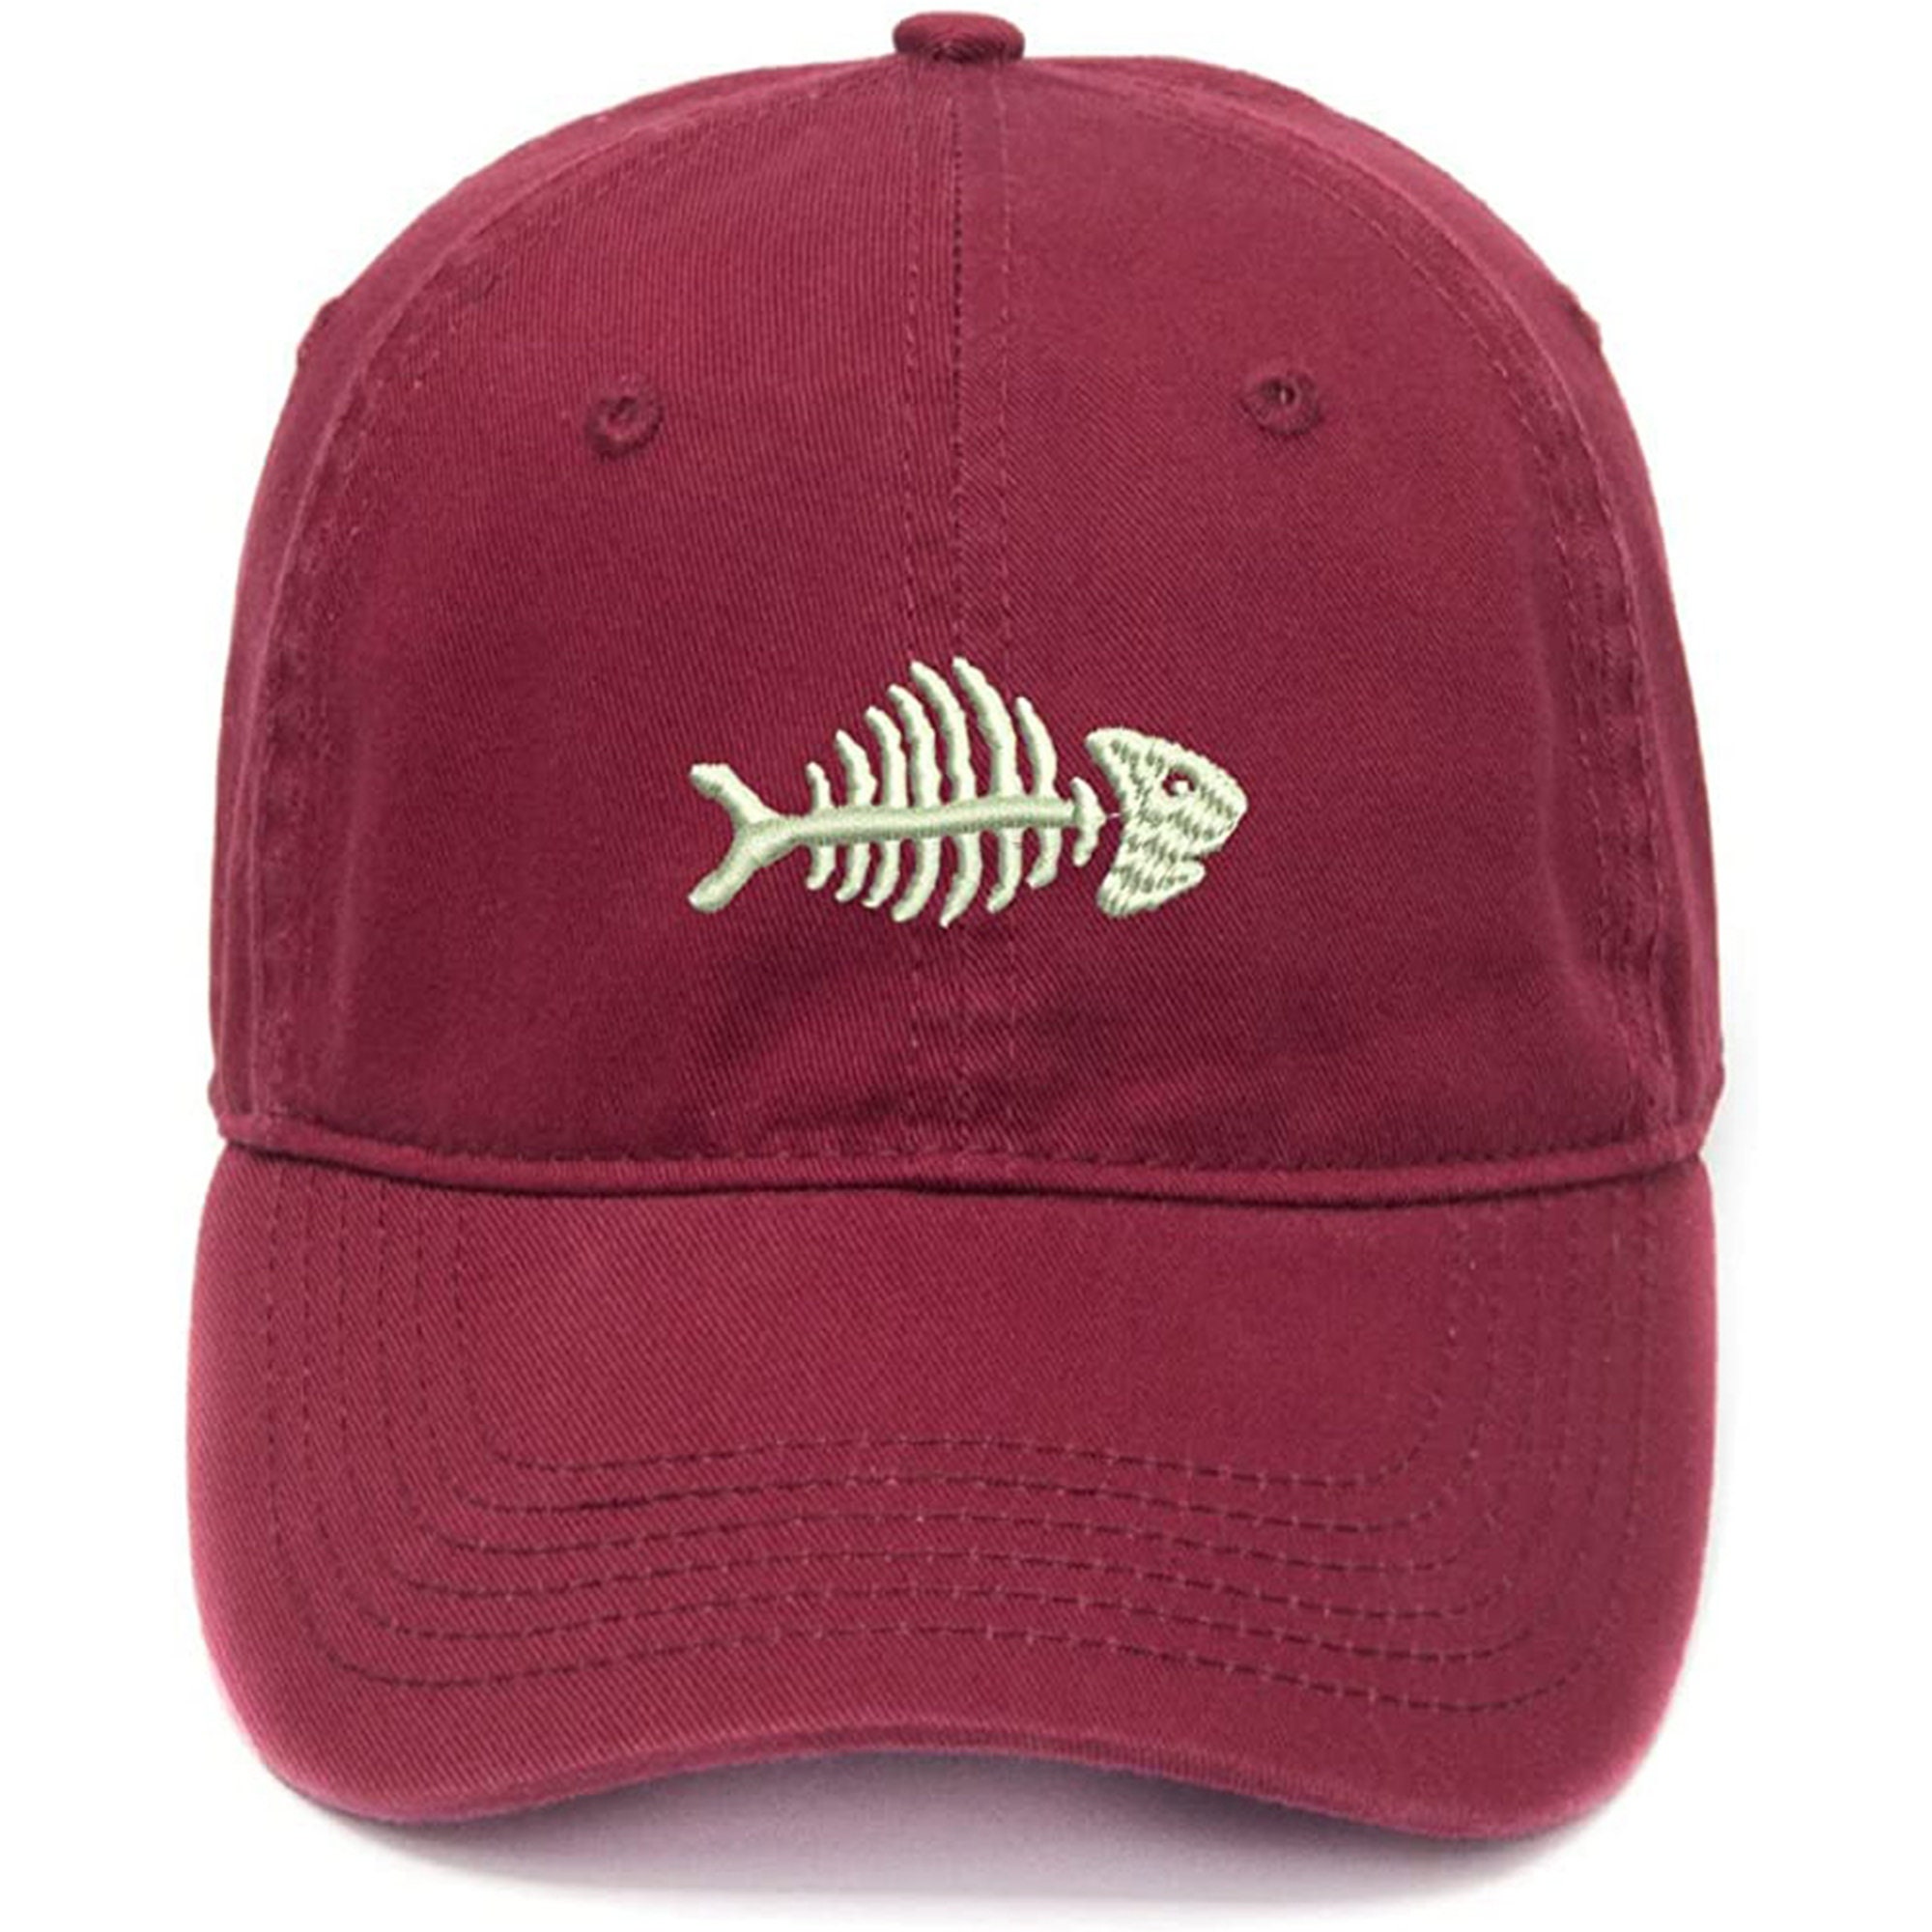 Embroidery Hat Cotton Embroidered Casual Men's Baseball Cap Fish Bone 